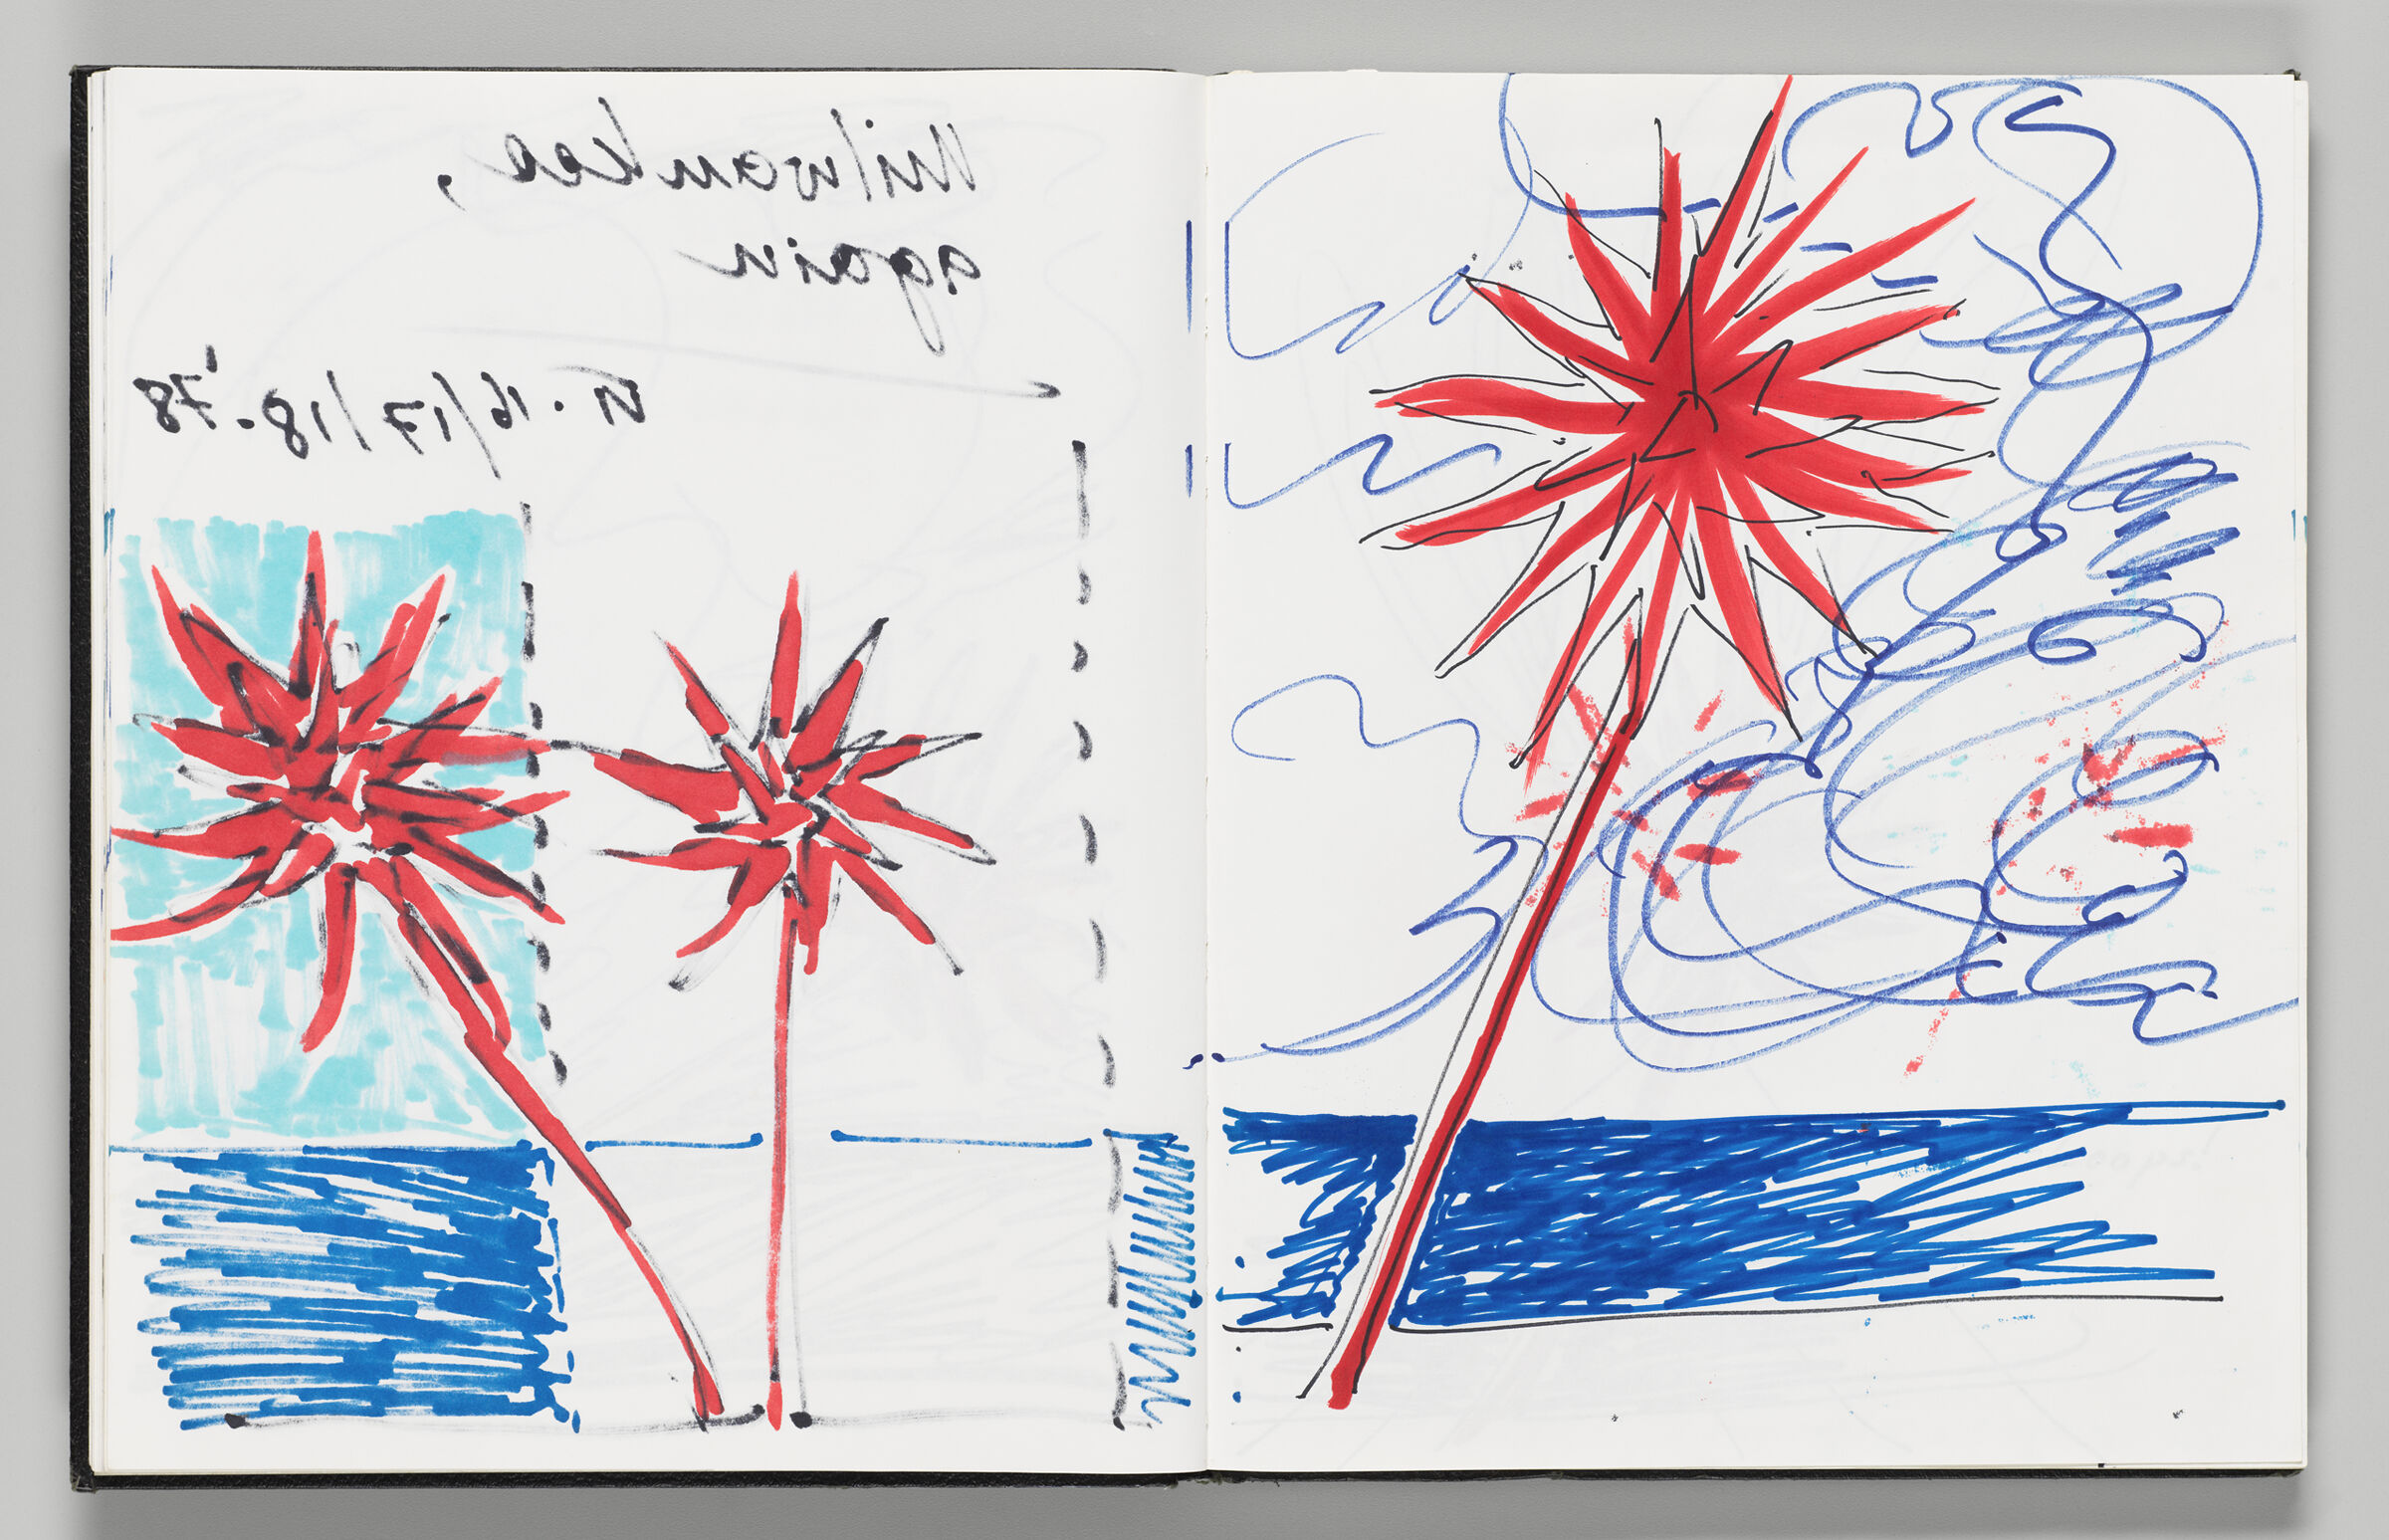 Untitled (Bleed-Through Of Previous Page, Left Page); Untitled (Sketch Of Lakefront Anemone, Right Page)